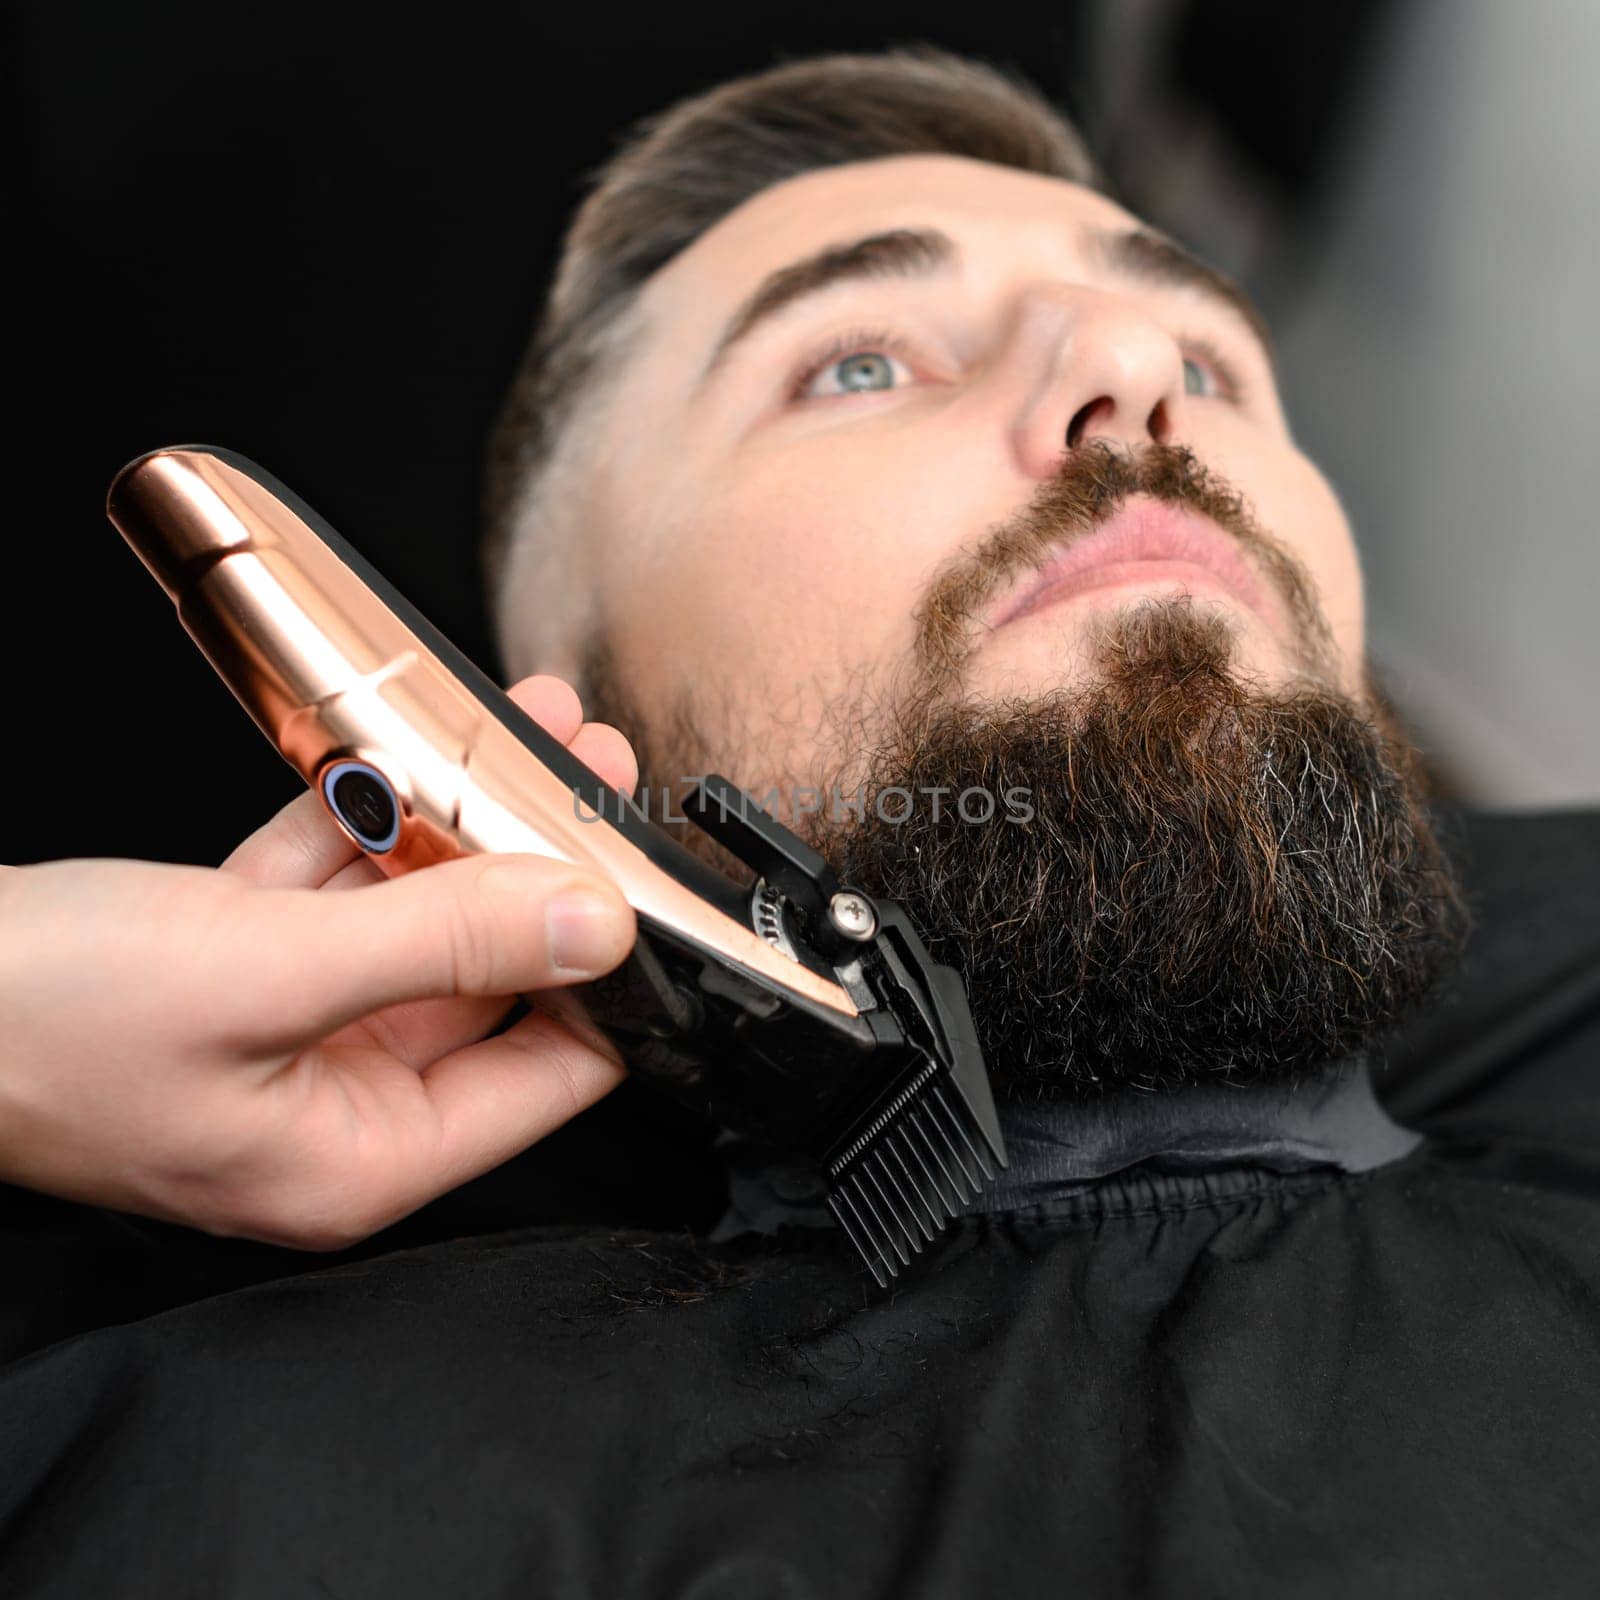 Cutting a gentlemans beard in a barbershop with a clipper. Shortening the length of the beard from the sides by the master for the client. by Niko_Cingaryuk